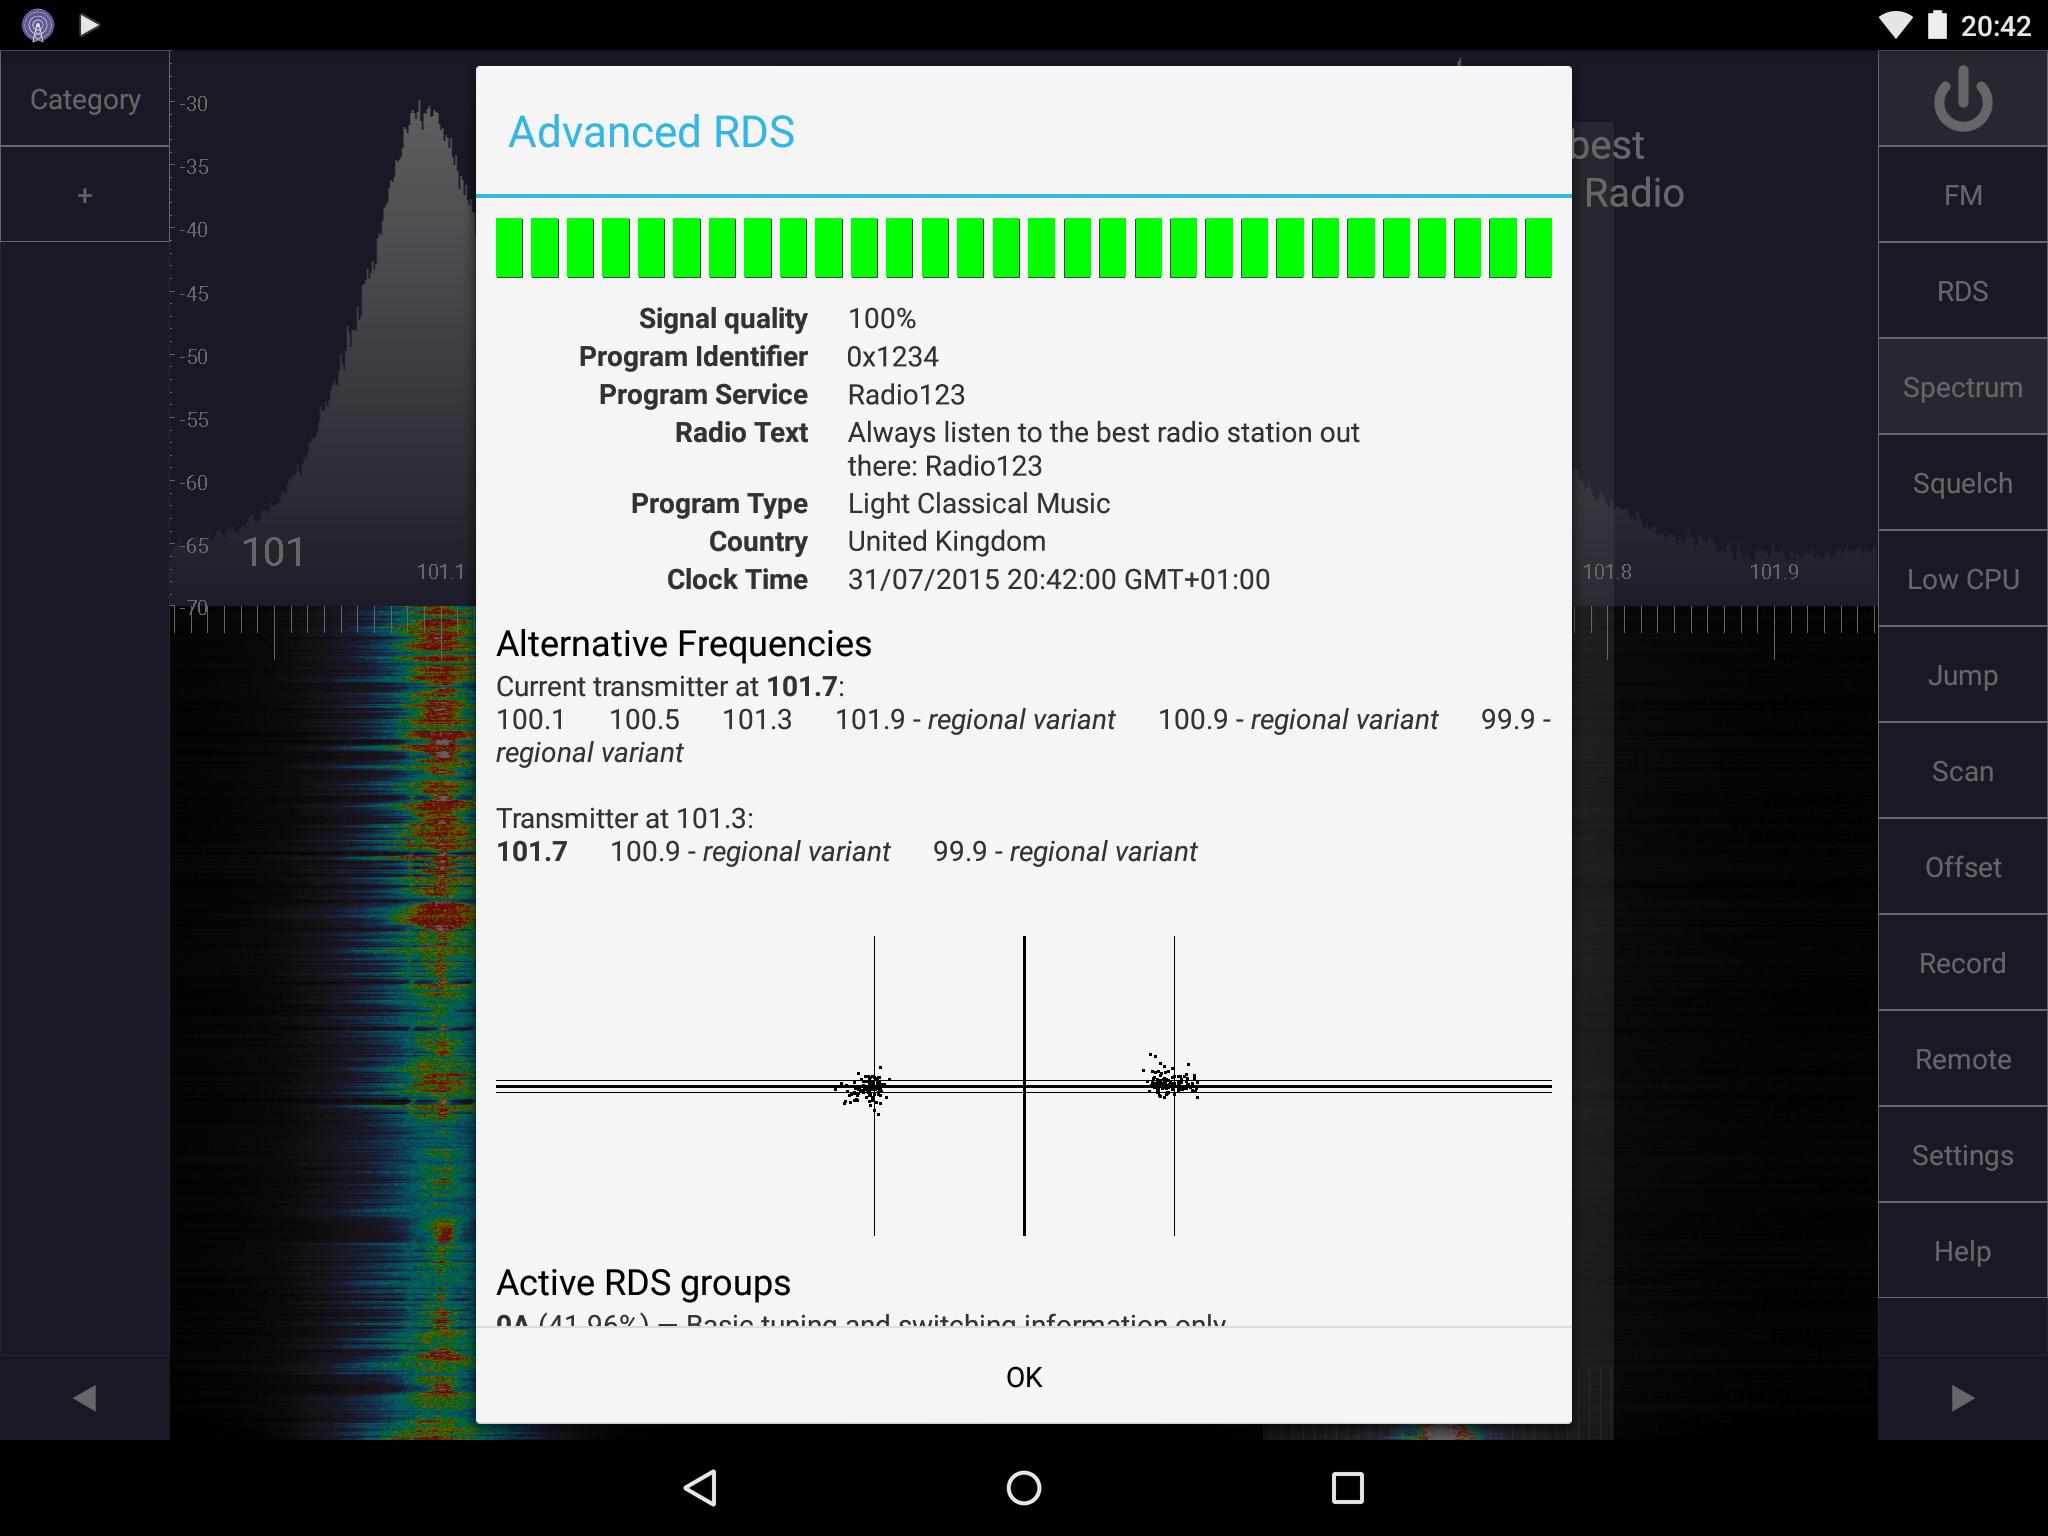 Sdr android. SDR андроид. Android SDR Touch. SDR Touch Декодер. SDR Touch в автомобиле.